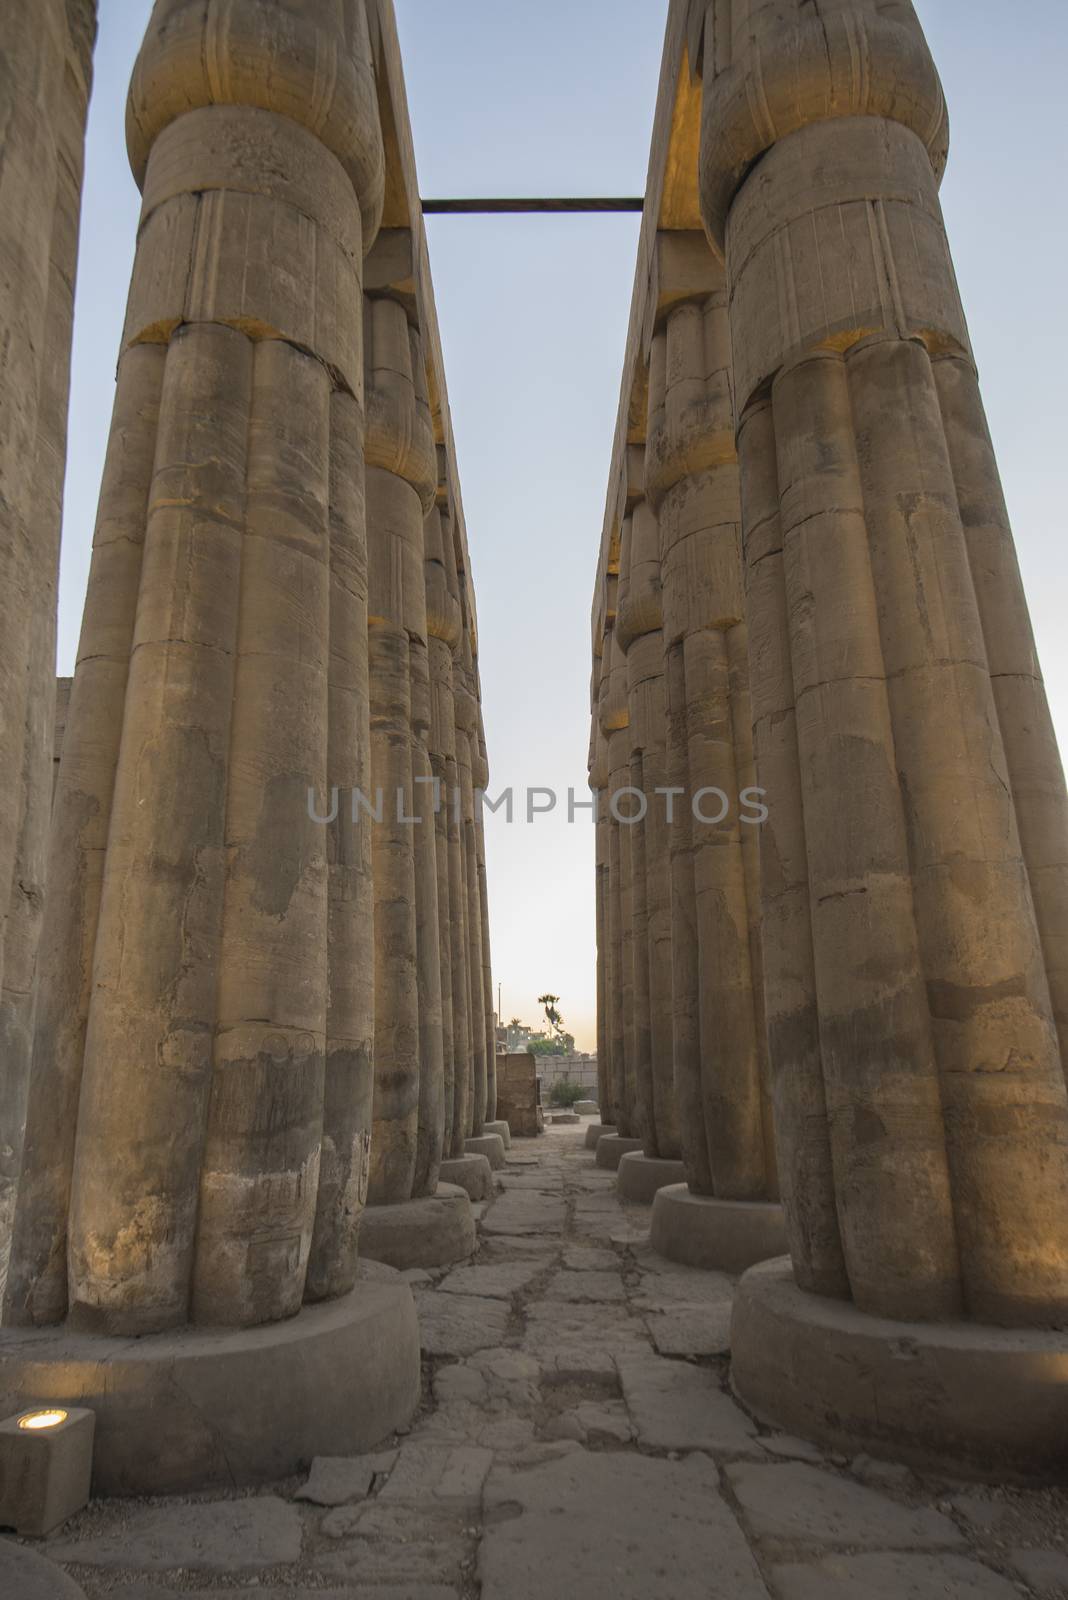 Columns with hieroglyphic carvings in ancient egyptian Luxor Temple in the evening